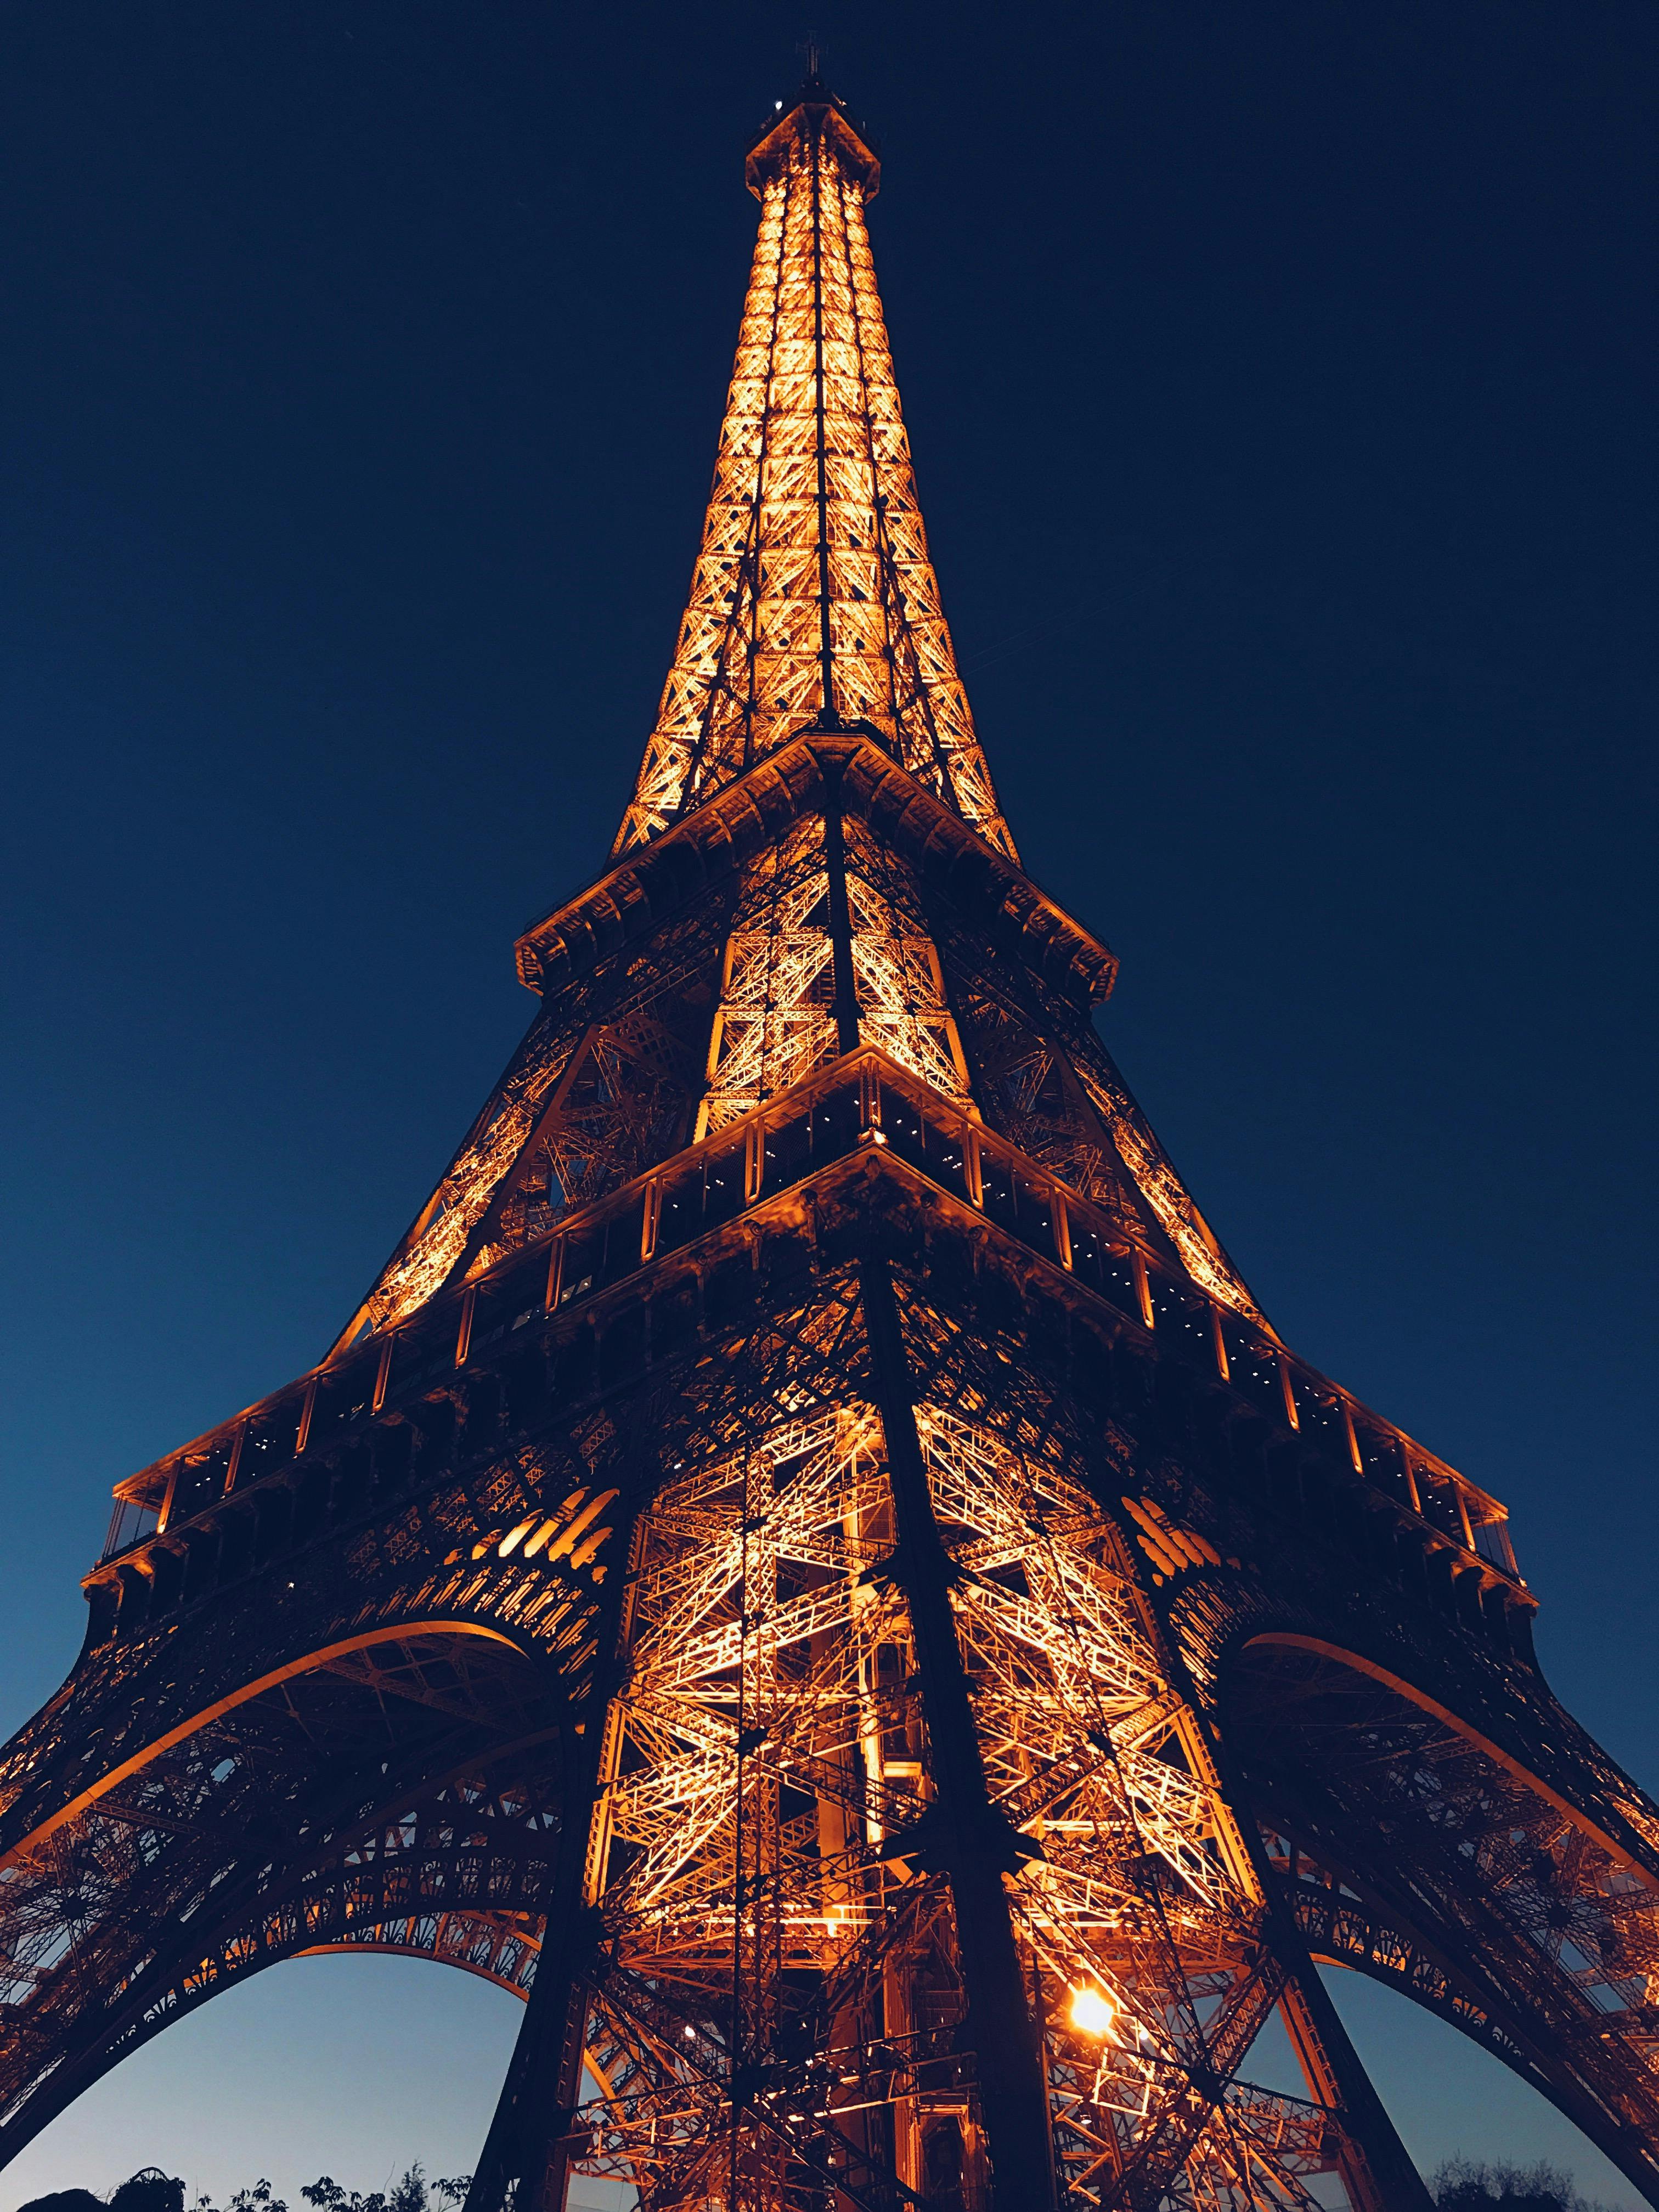 Eiffel Tower Photos, Download The BEST Free Eiffel Tower Stock